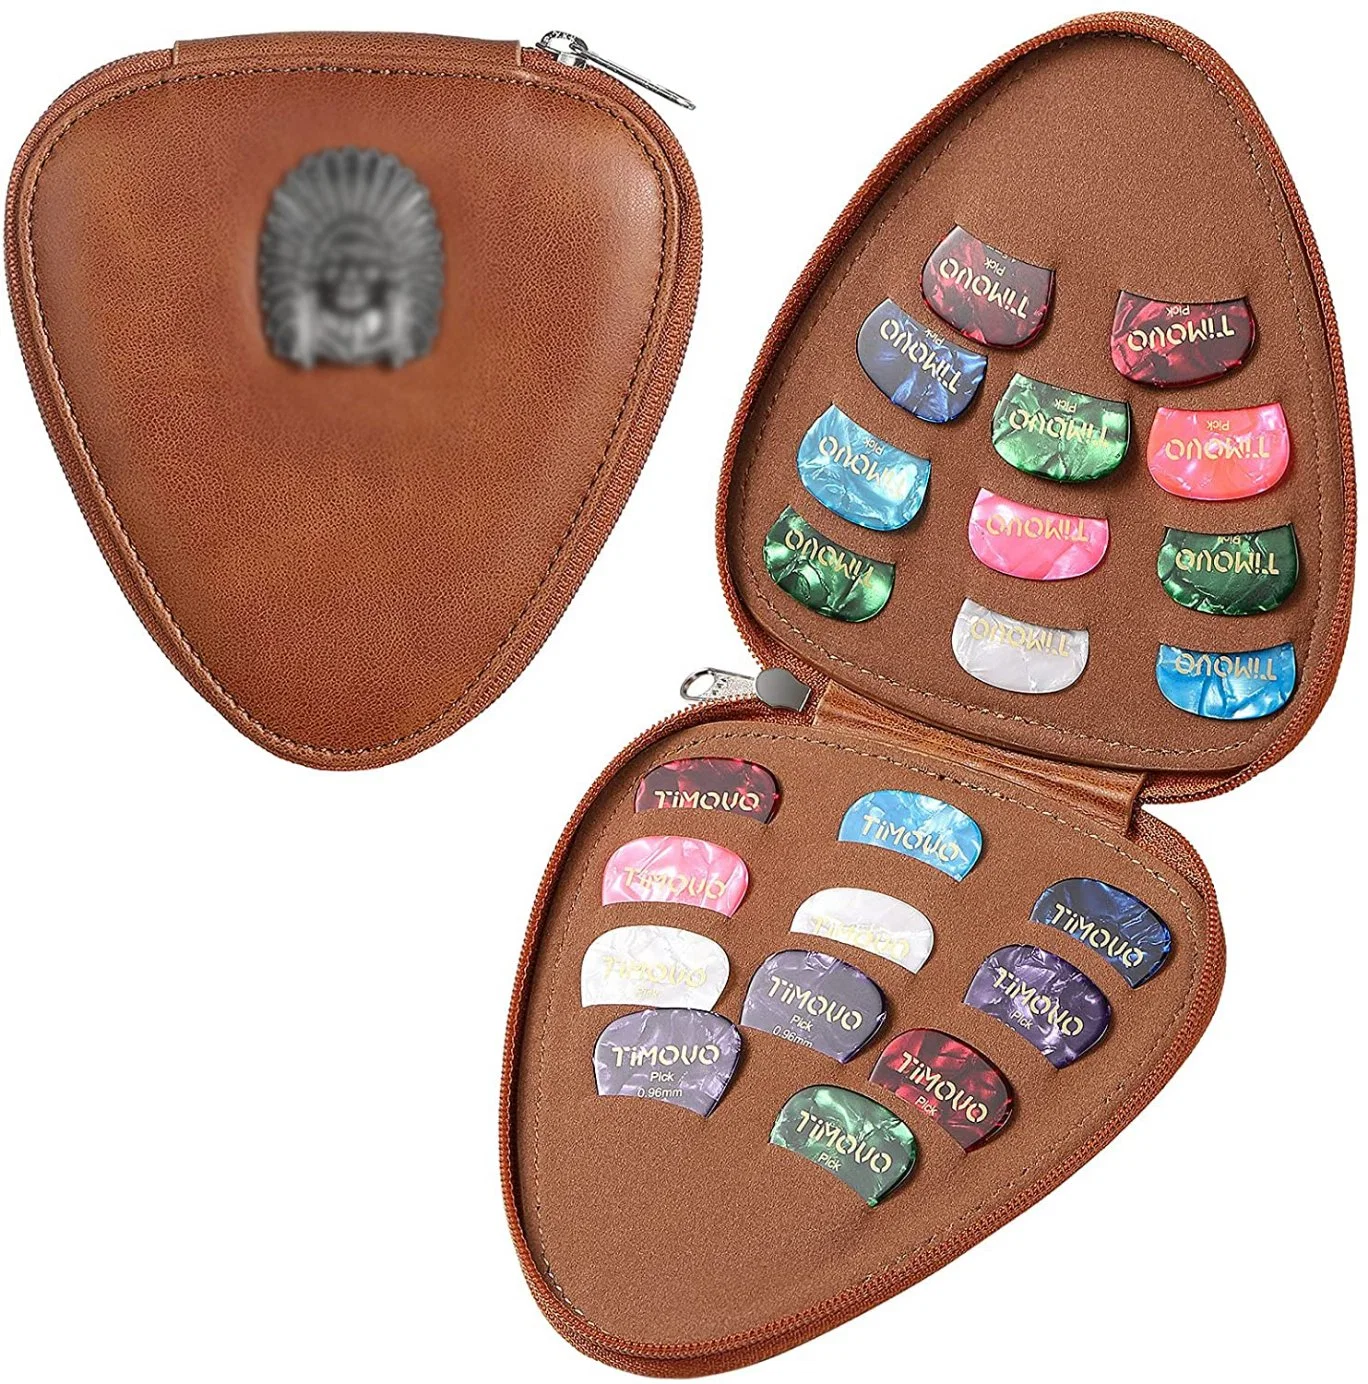 Brown Gift for Guitar Players Guitar Picks Holder Case Variety Pack Picks Storage Pouch Box PU Leather Guitar Plectrums Bag